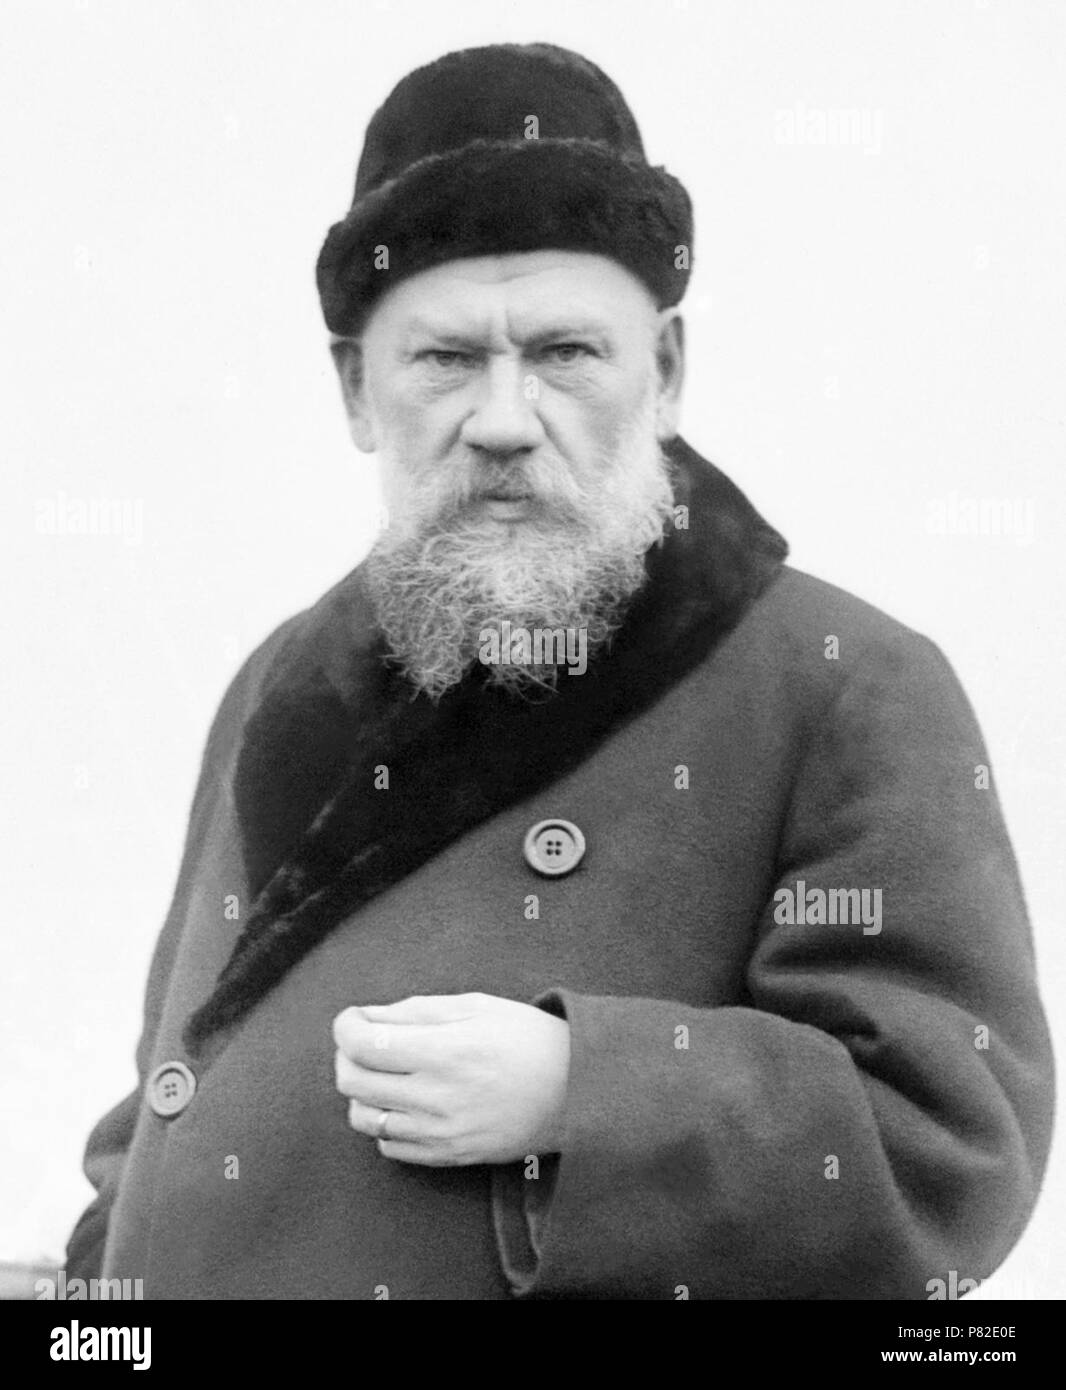 Ilya Lvovich Tolstoy (1866-1933) was a Russian writer who, as the son of Leo Tolstoy, is best known for his book of memoirs about his father, Reminiscences of Tolstoy. (Photo: December 1916) Stock Photo